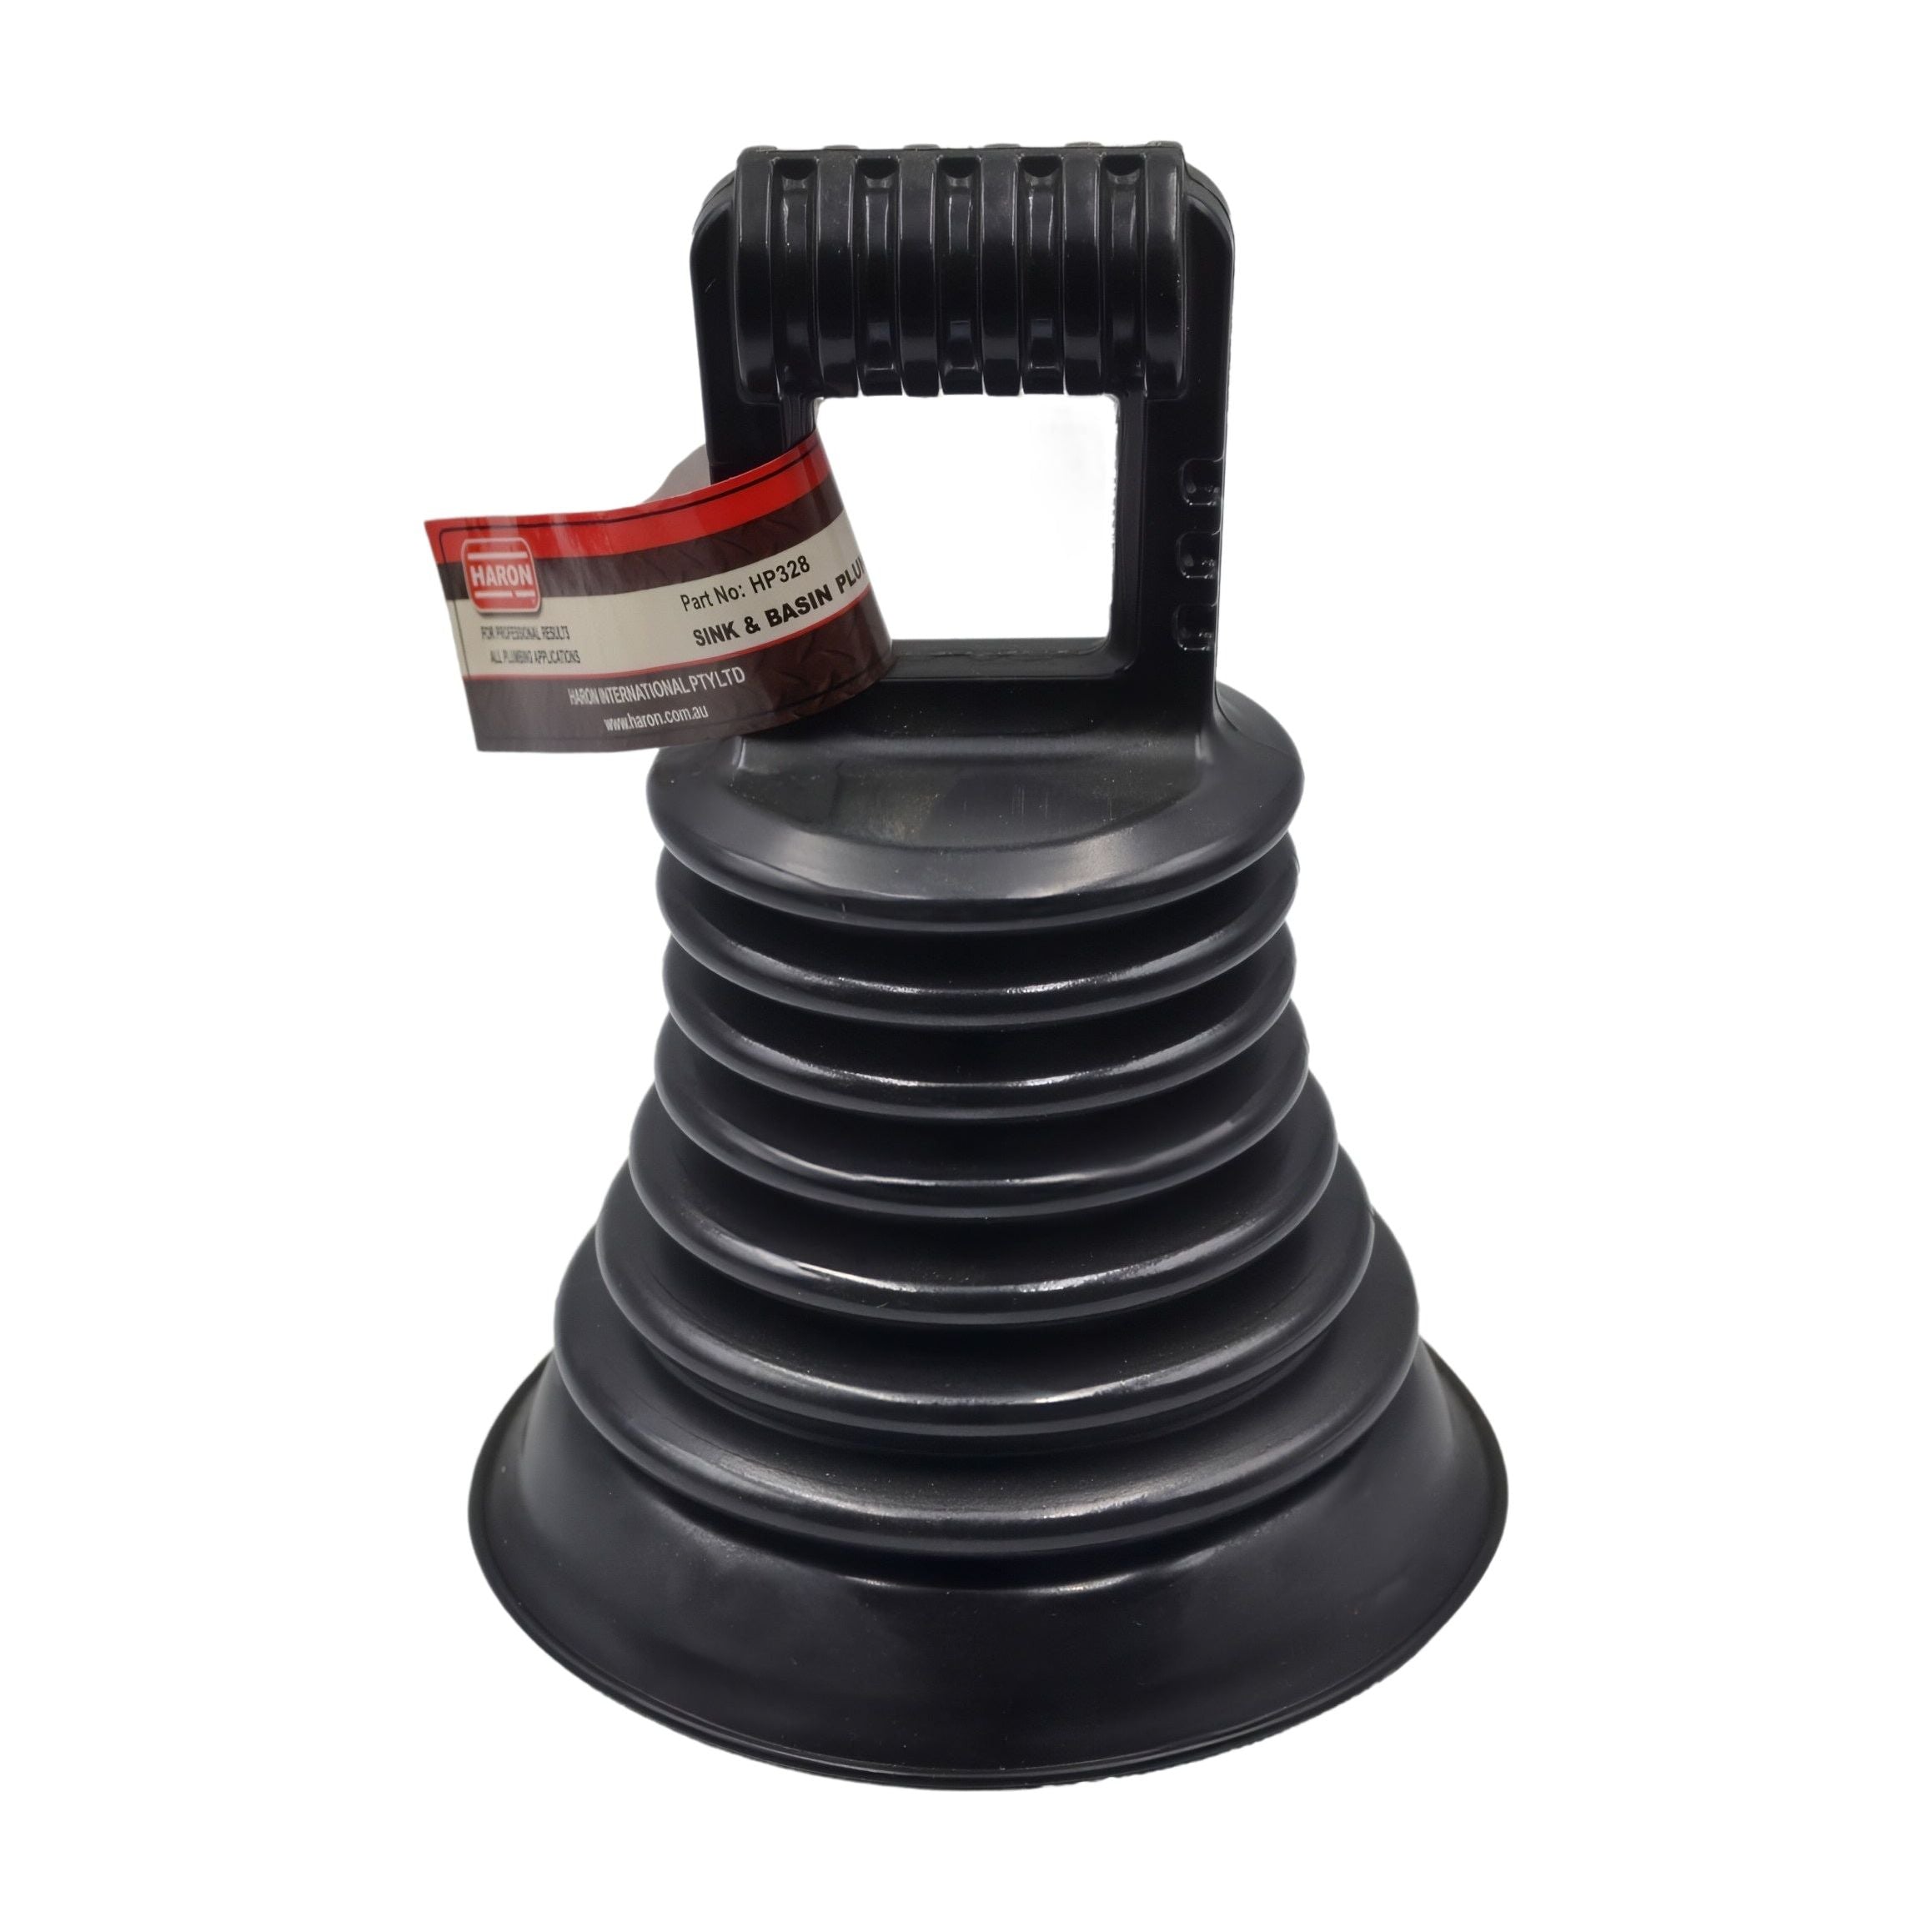 Haron HP328 Easy Grip Mini Master Plunger for Sinks and Basins